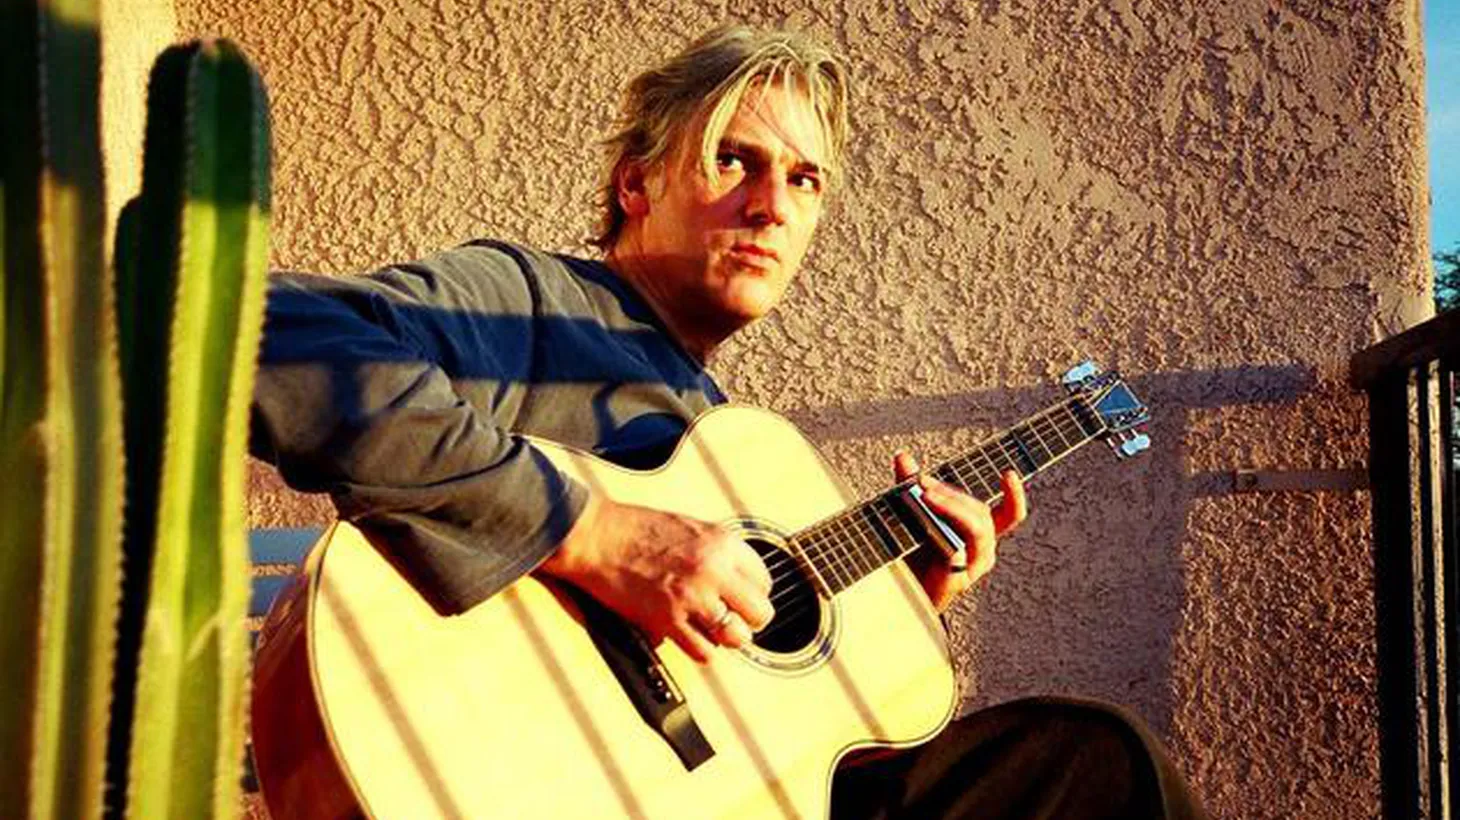 British songwriter Robyn Hitchcock is a cult favorite for his delightful wit and surreal songs.